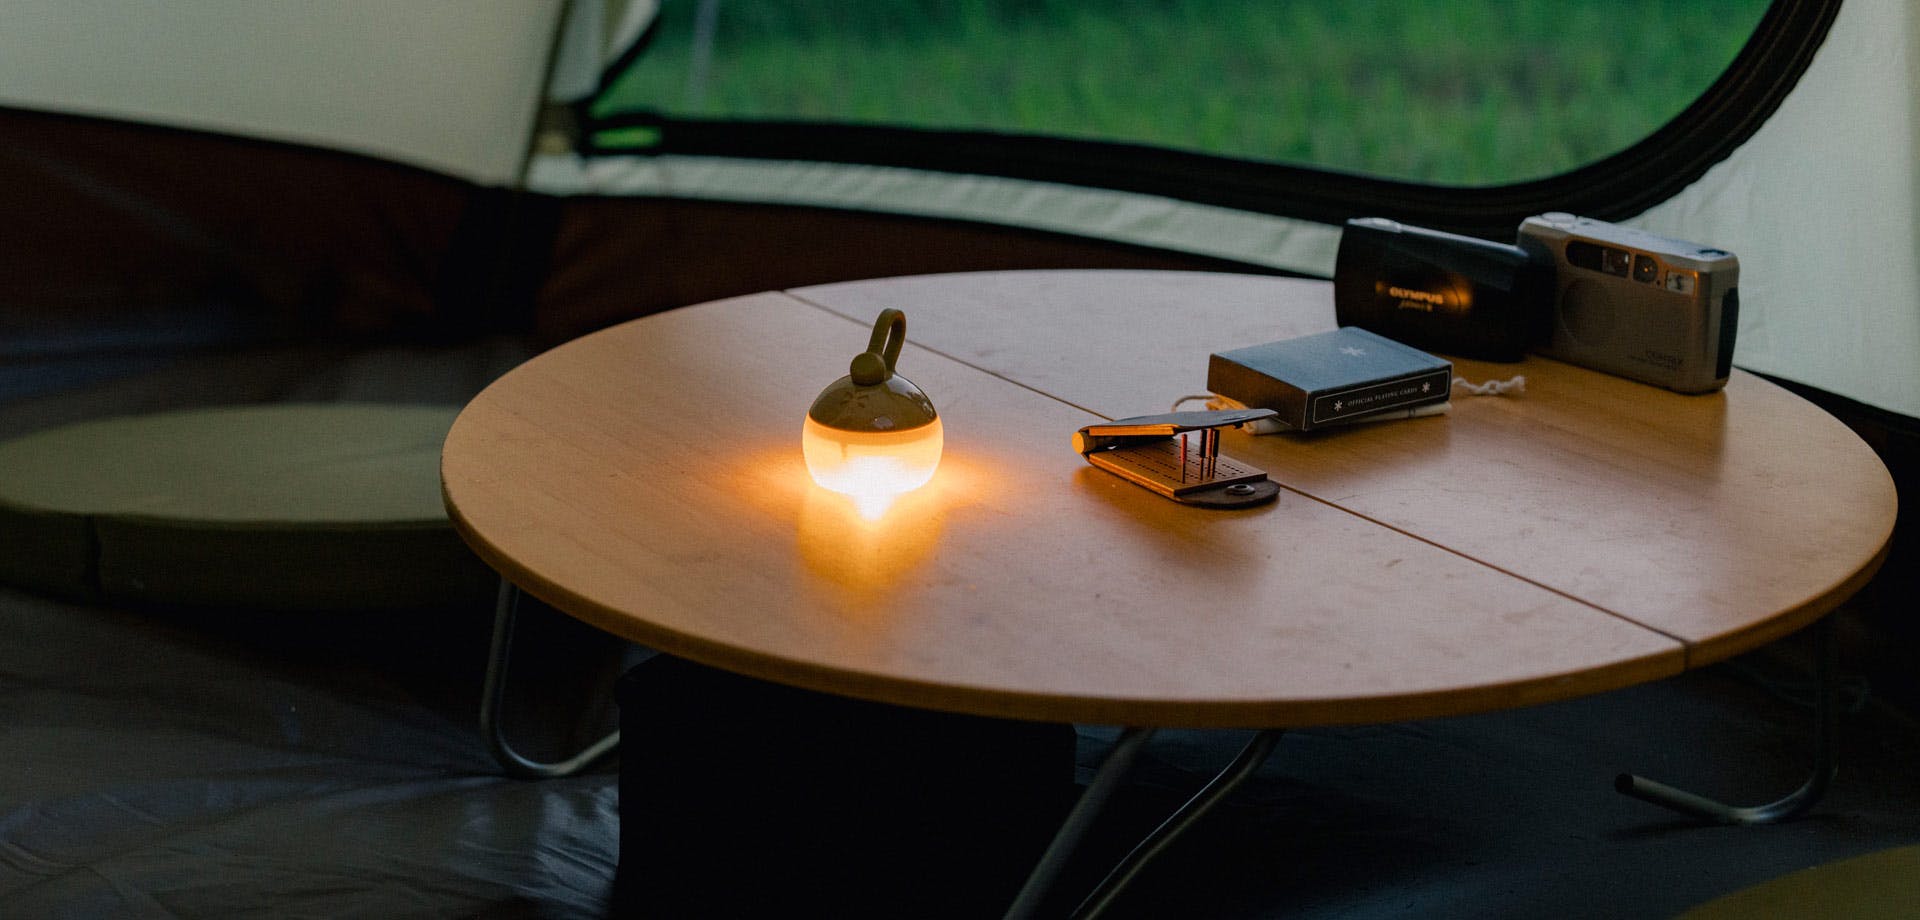 a photo of a round, low, wooden table with a small light and other personal items on it